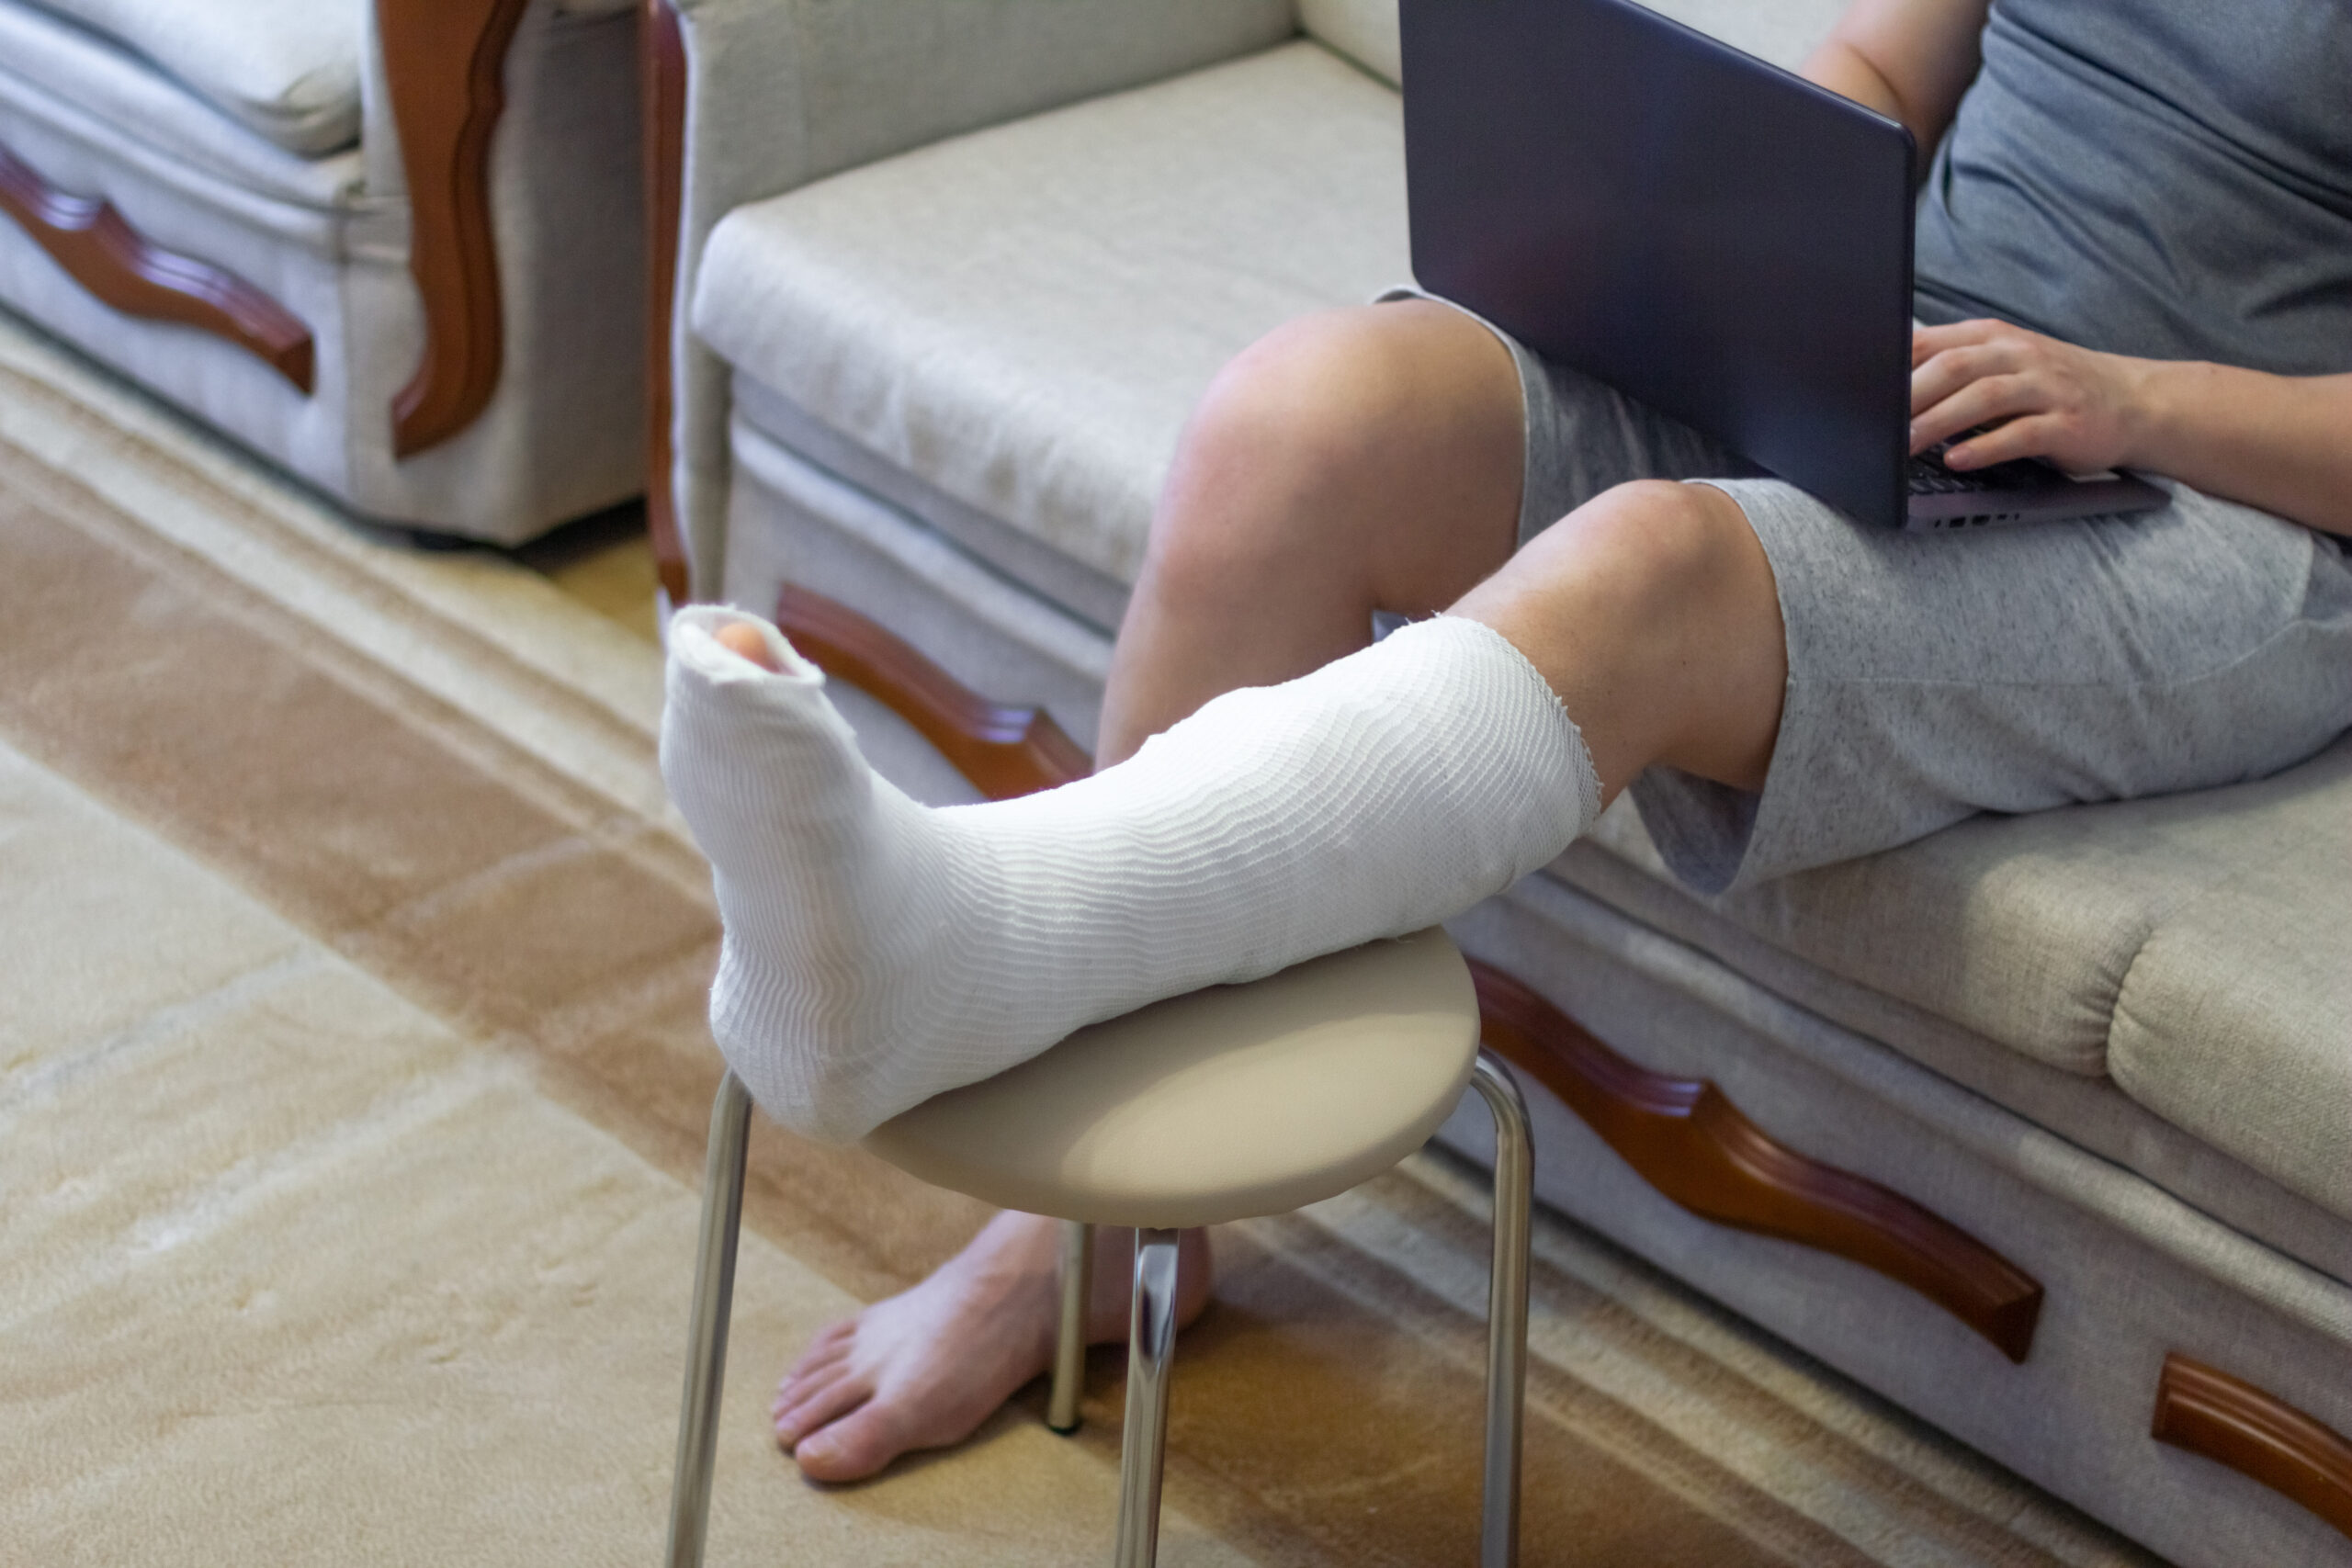 A man sits on a sofa in a cast with a laptop. A leg in a cast lies on a chair.